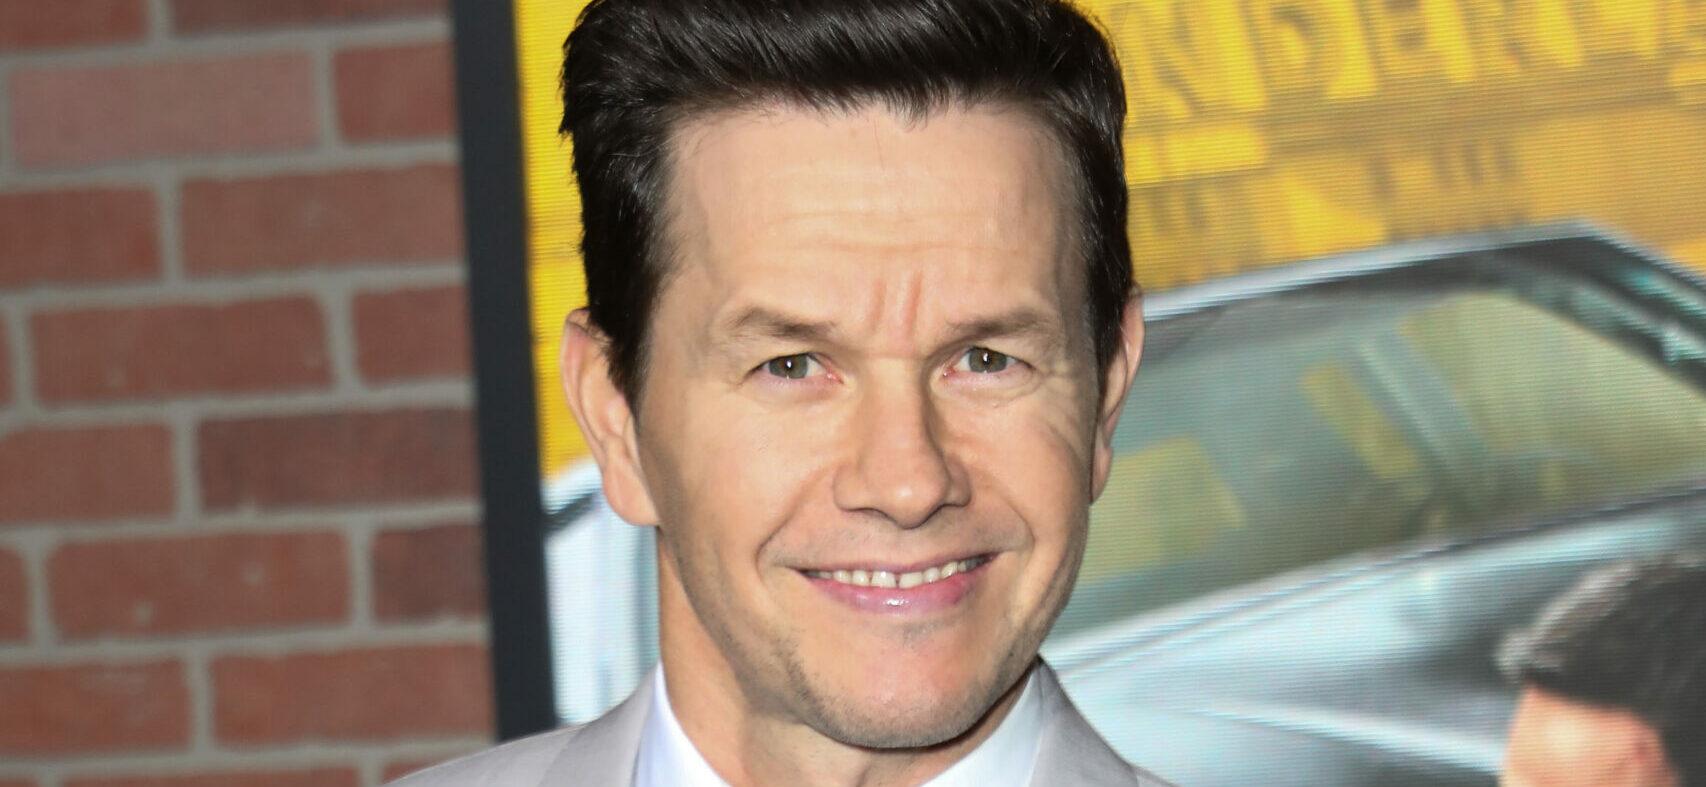 WESTWOOD, LOS ANGELES, CALIFORNIA, USA - FEBRUARY 27: Los Angeles Premiere Of Netflix's 'Spenser Confidential' held at the Regency Village Theatre on February 27, 2020 in Westwood, Los Angeles, California, United States. 27 Feb 2020 Pictured: Mark Wahlberg. Photo credit: Image Press Agency/MEGA TheMegaAgency.com +1 888 505 6342 (Mega Agency TagID: MEGA620335_030.jpg) [Photo via Mega Agency]